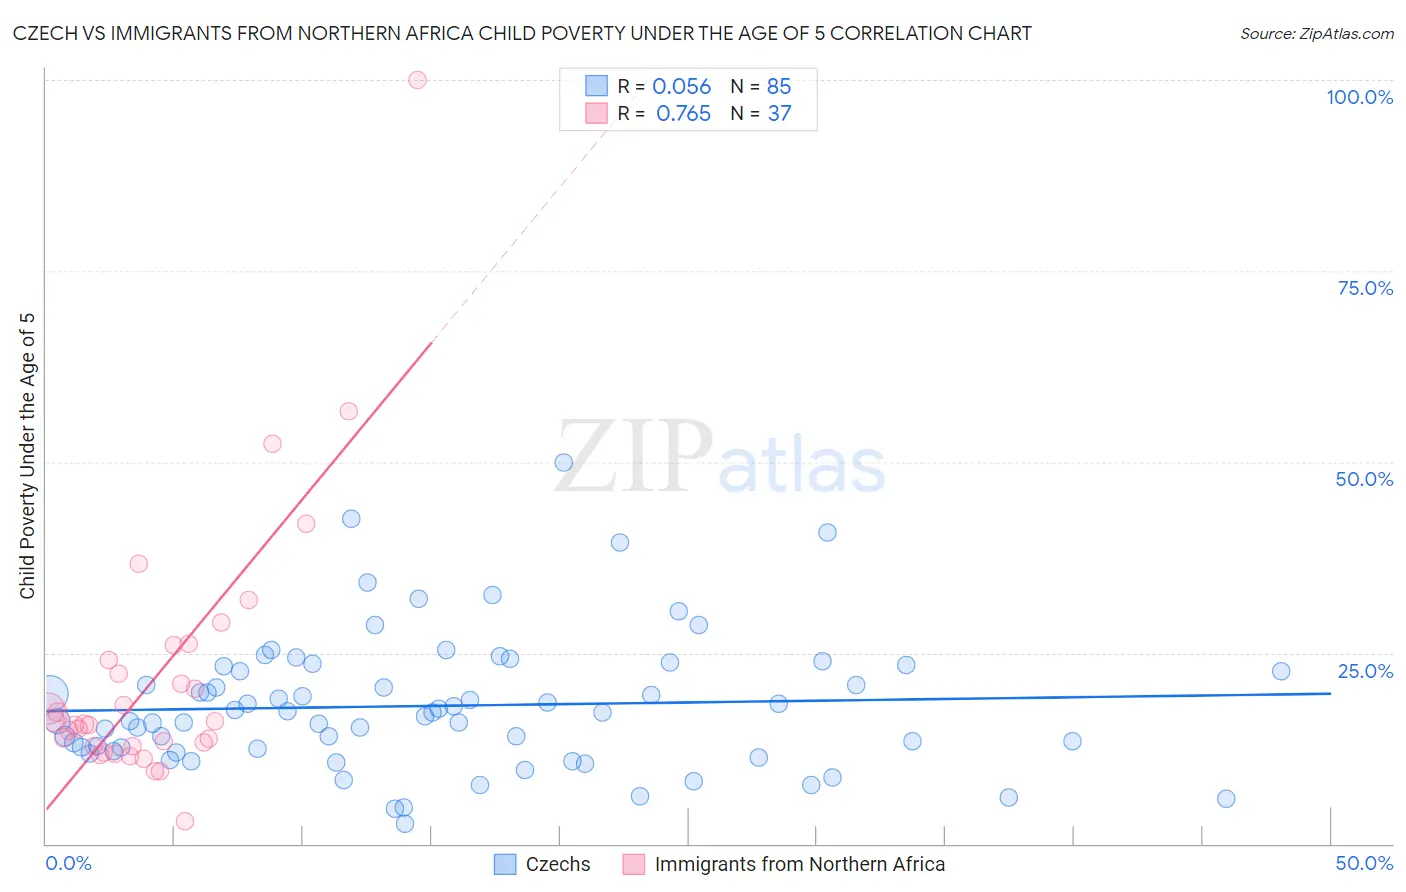 Czech vs Immigrants from Northern Africa Child Poverty Under the Age of 5